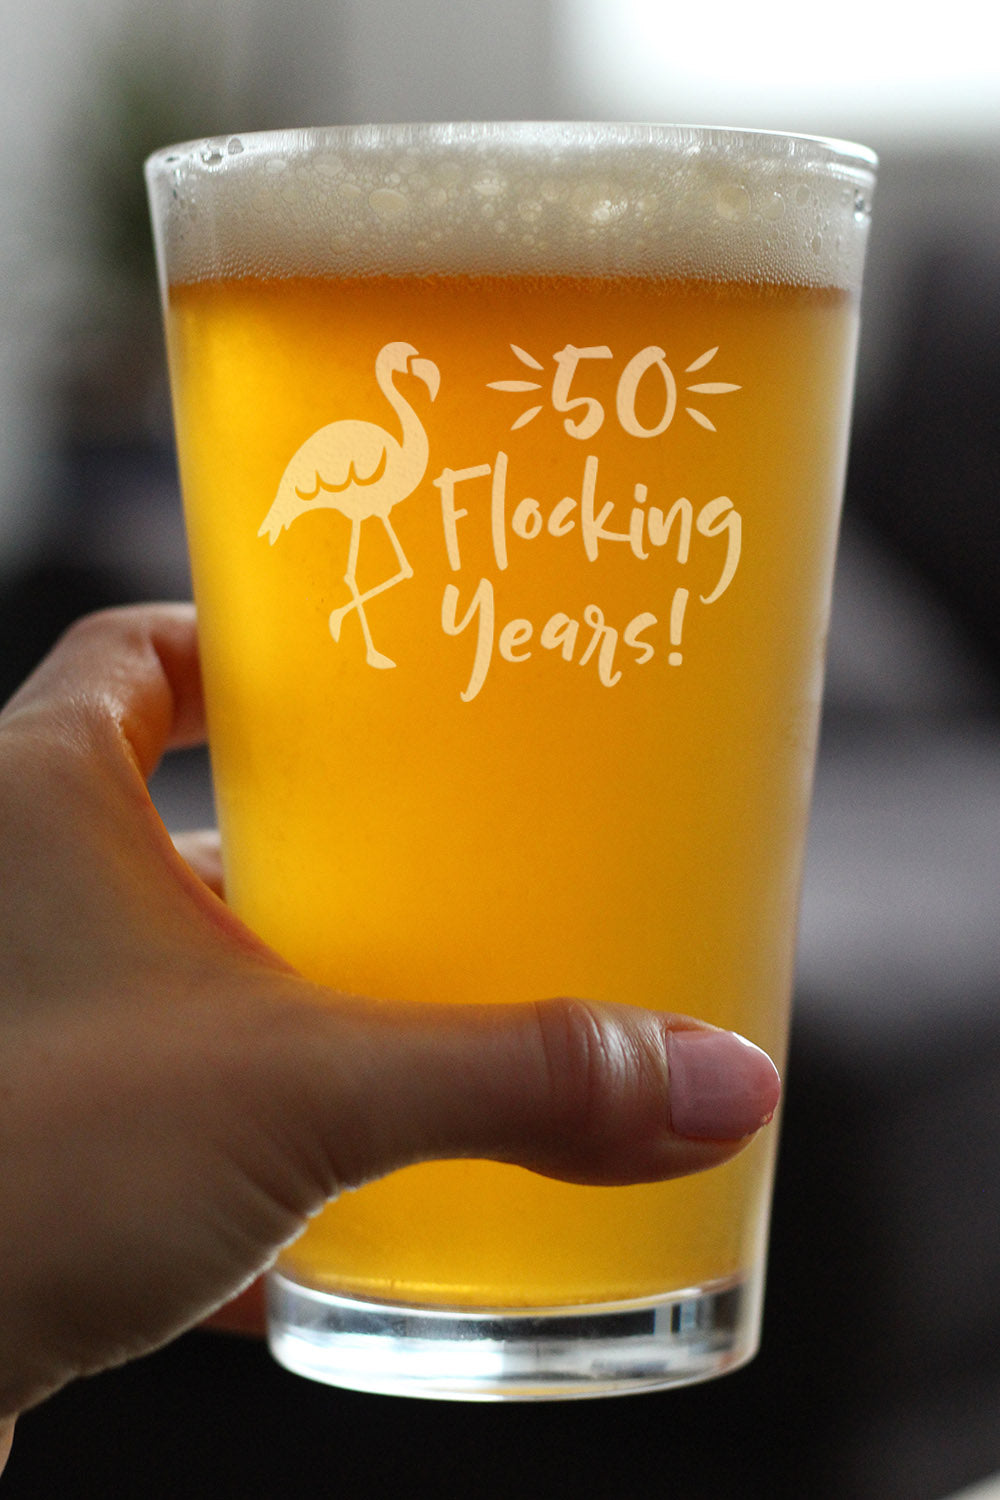 50 Flocking Years - 16 Ounce Pint Glass